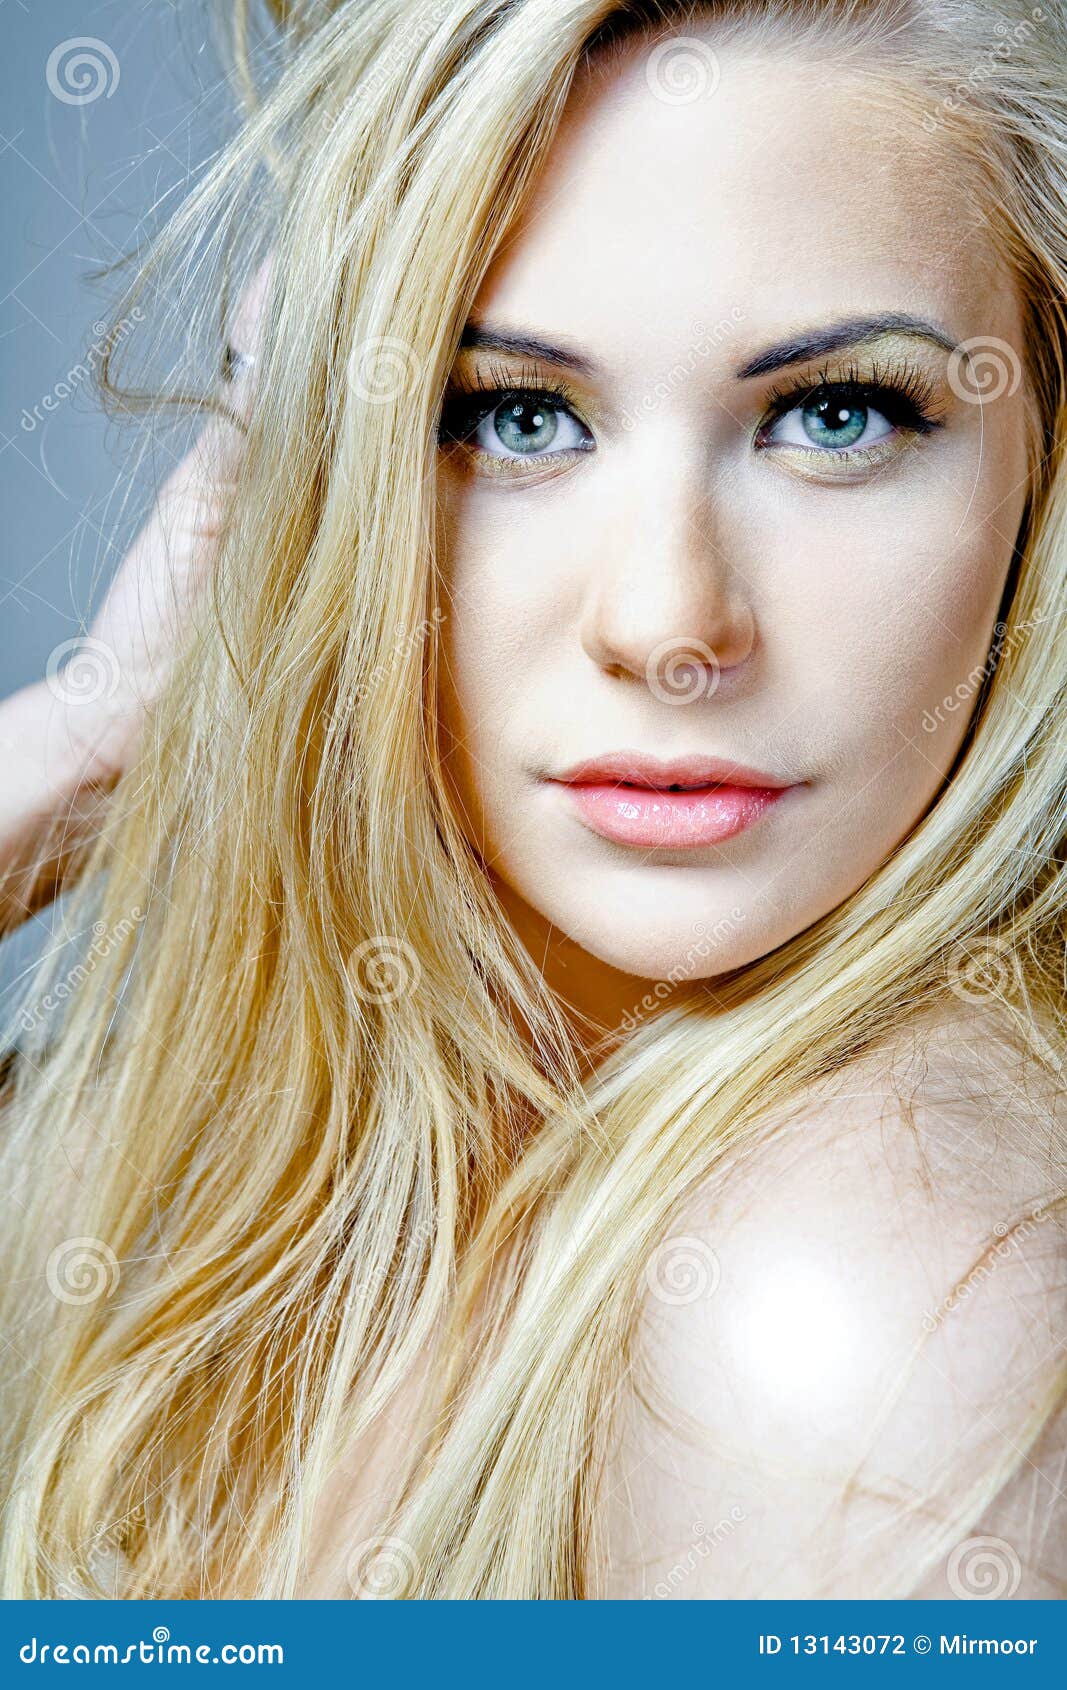 Model With Long Blond Hair. Stock Photography - Image 